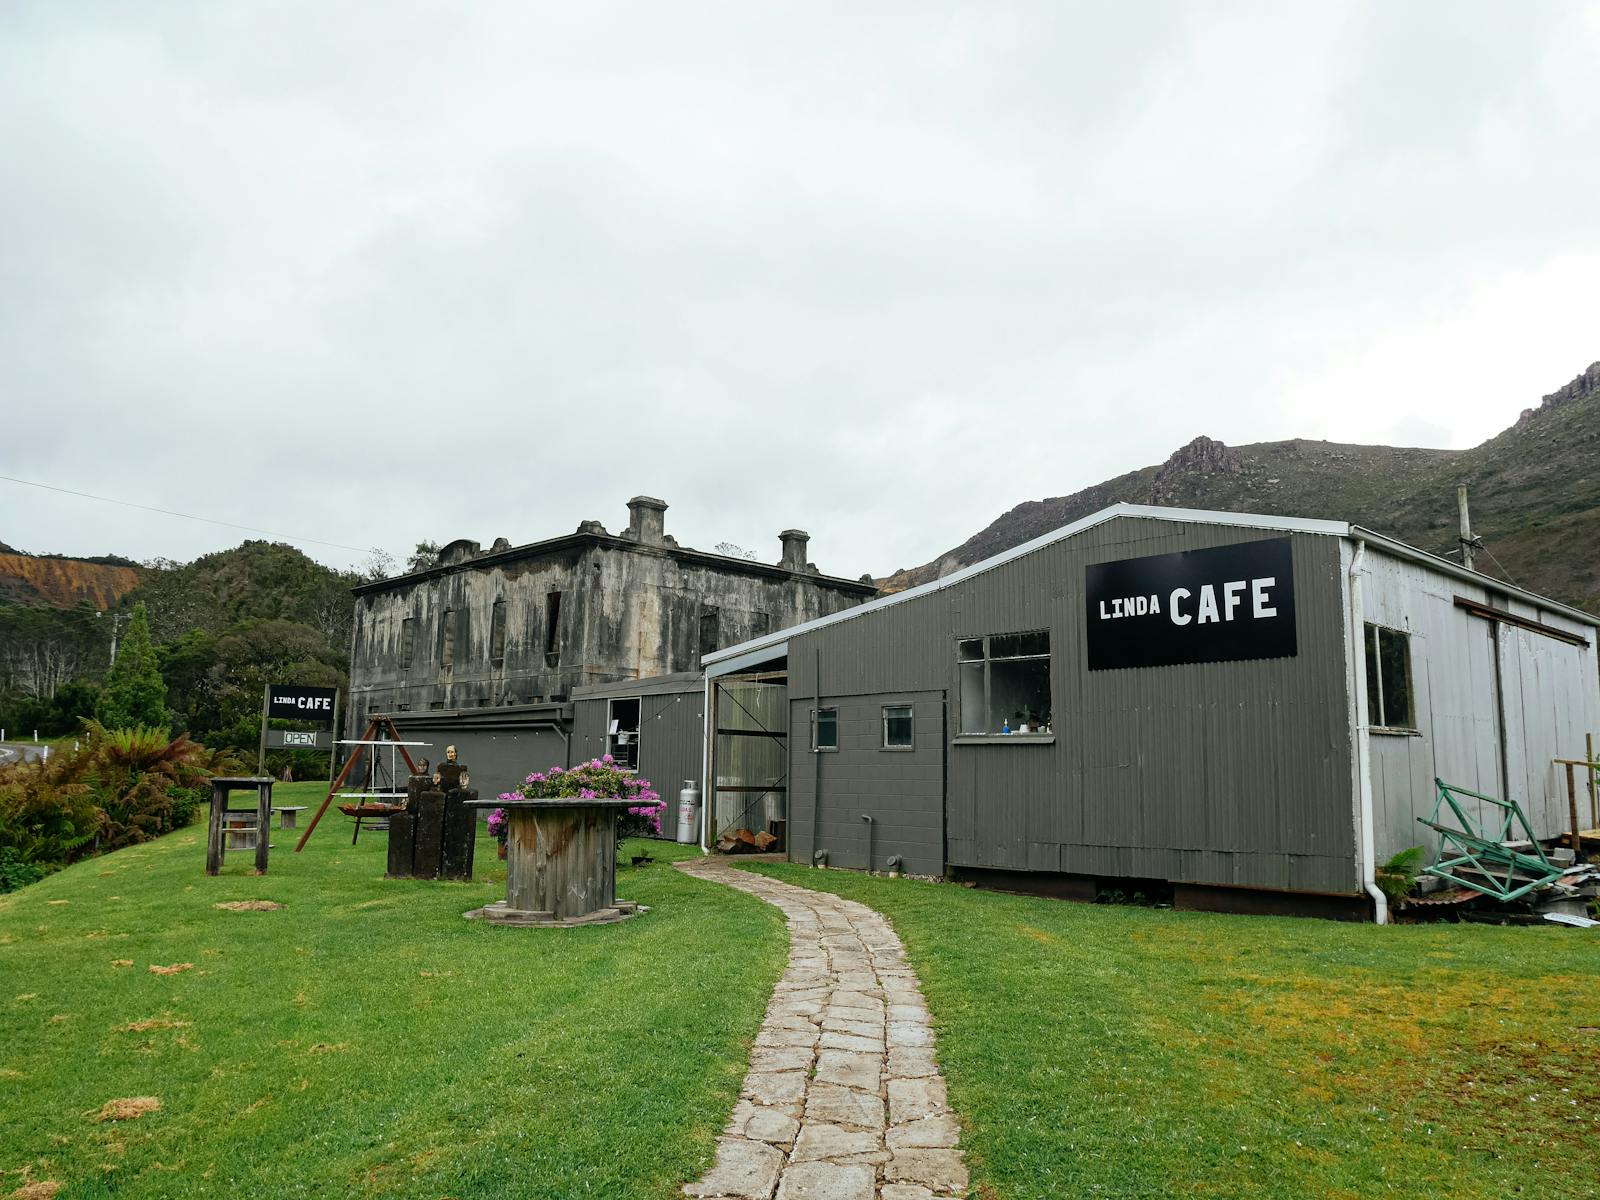 A photo of Linda Cafe from outside on foreground and Royal Hotel in background.